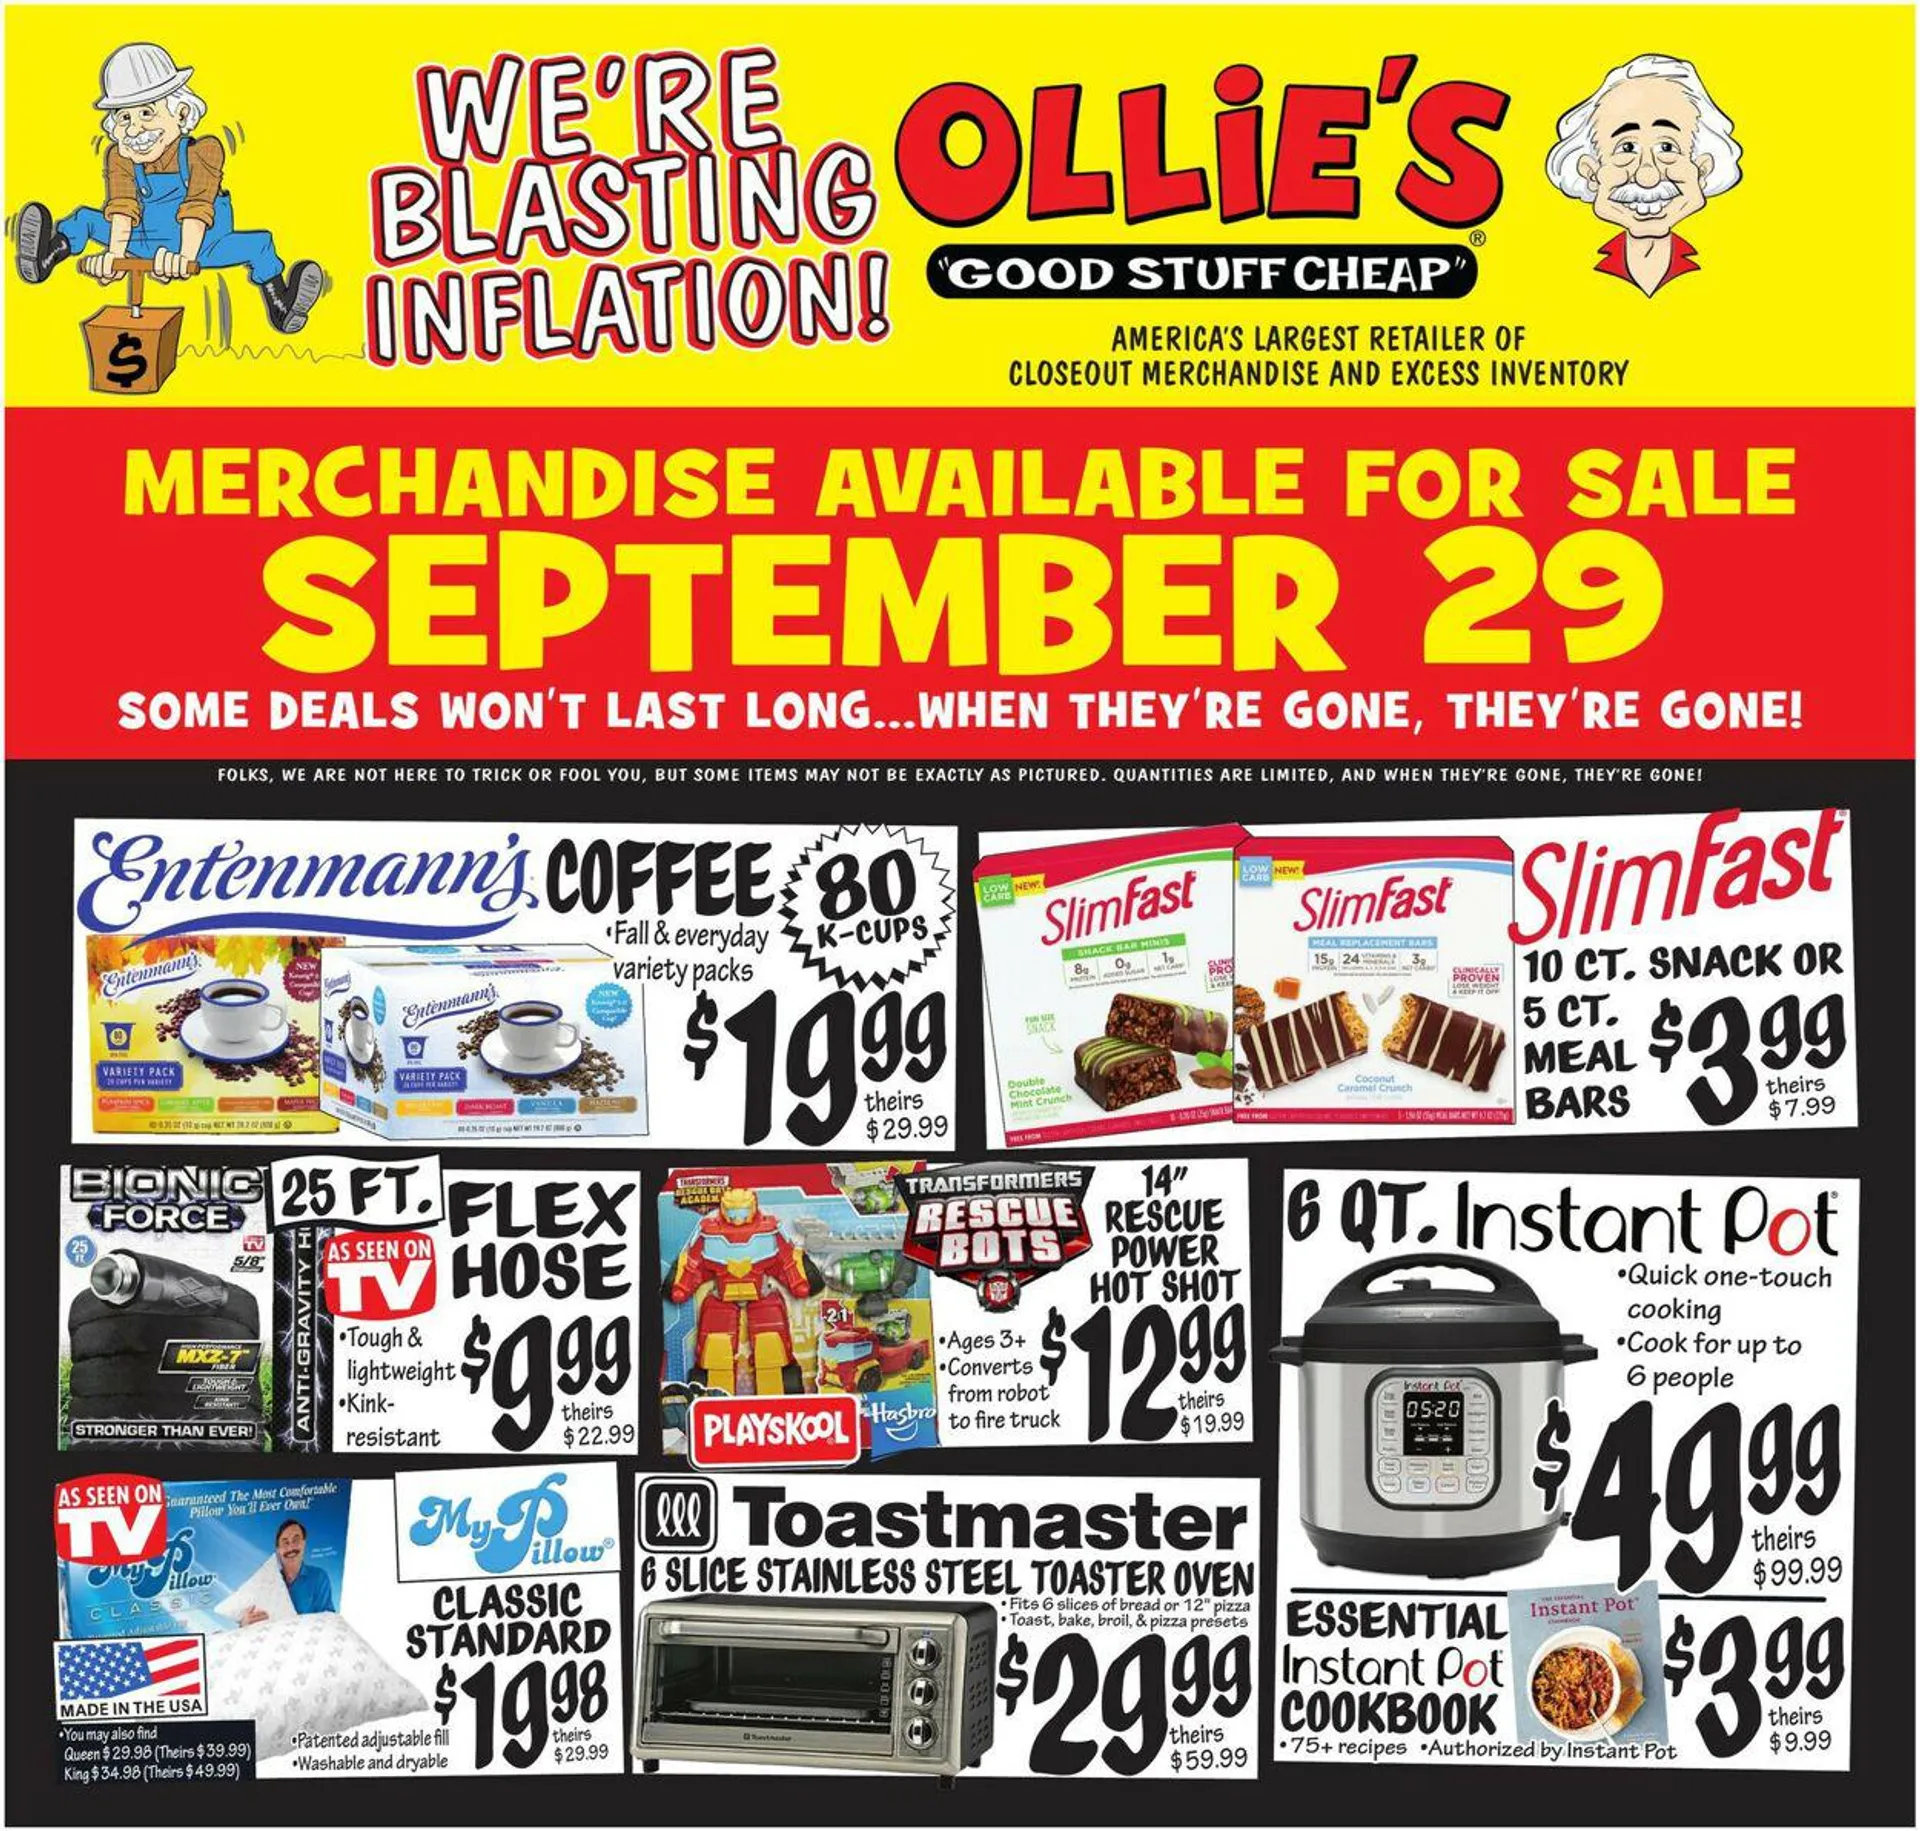 Ollies Current weekly ad - 1